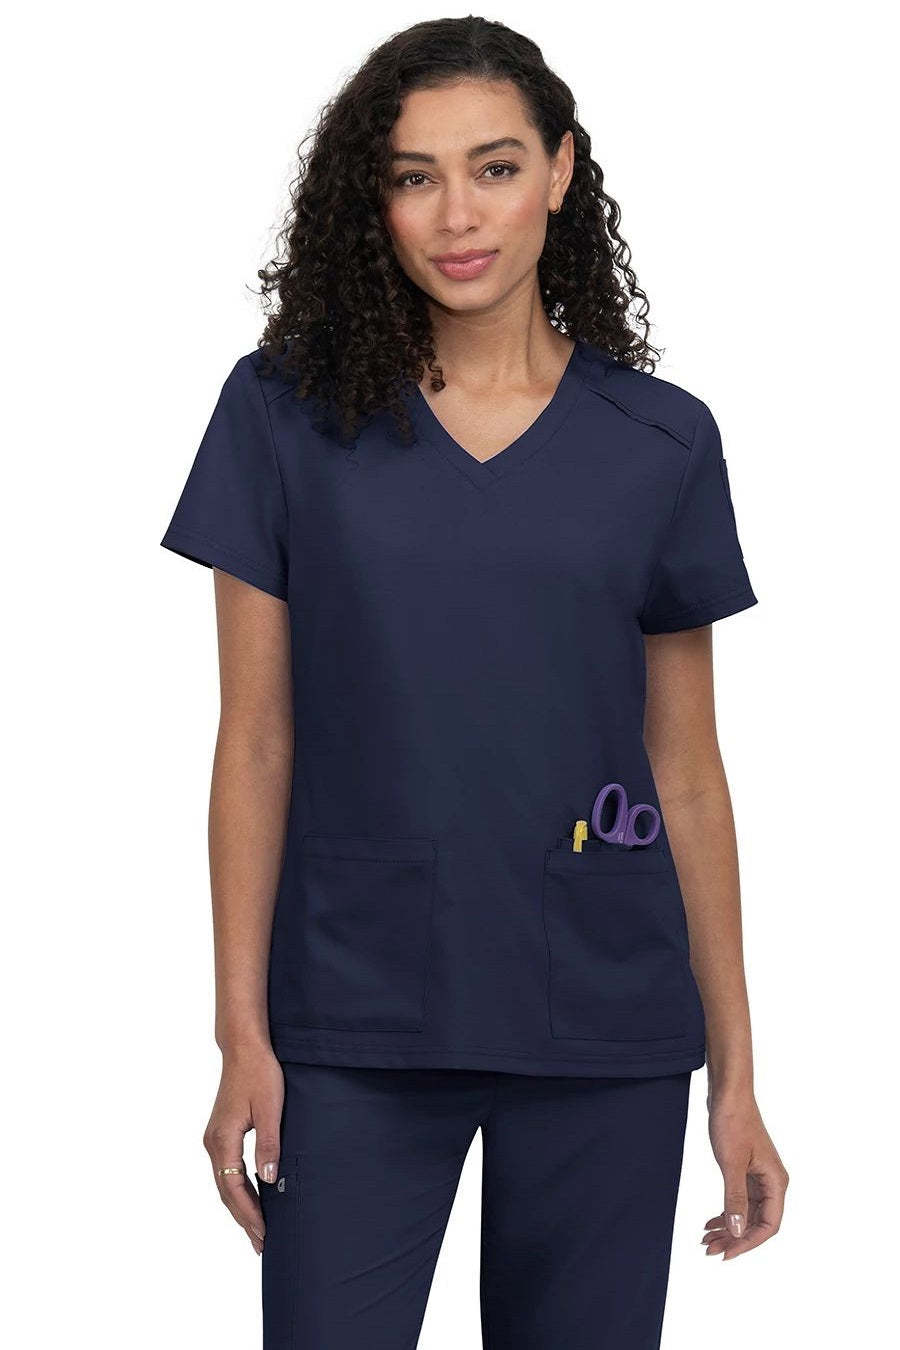 koi Scrub Top Cureology Cardi in Navy at Parker's Clothing and Shoes.